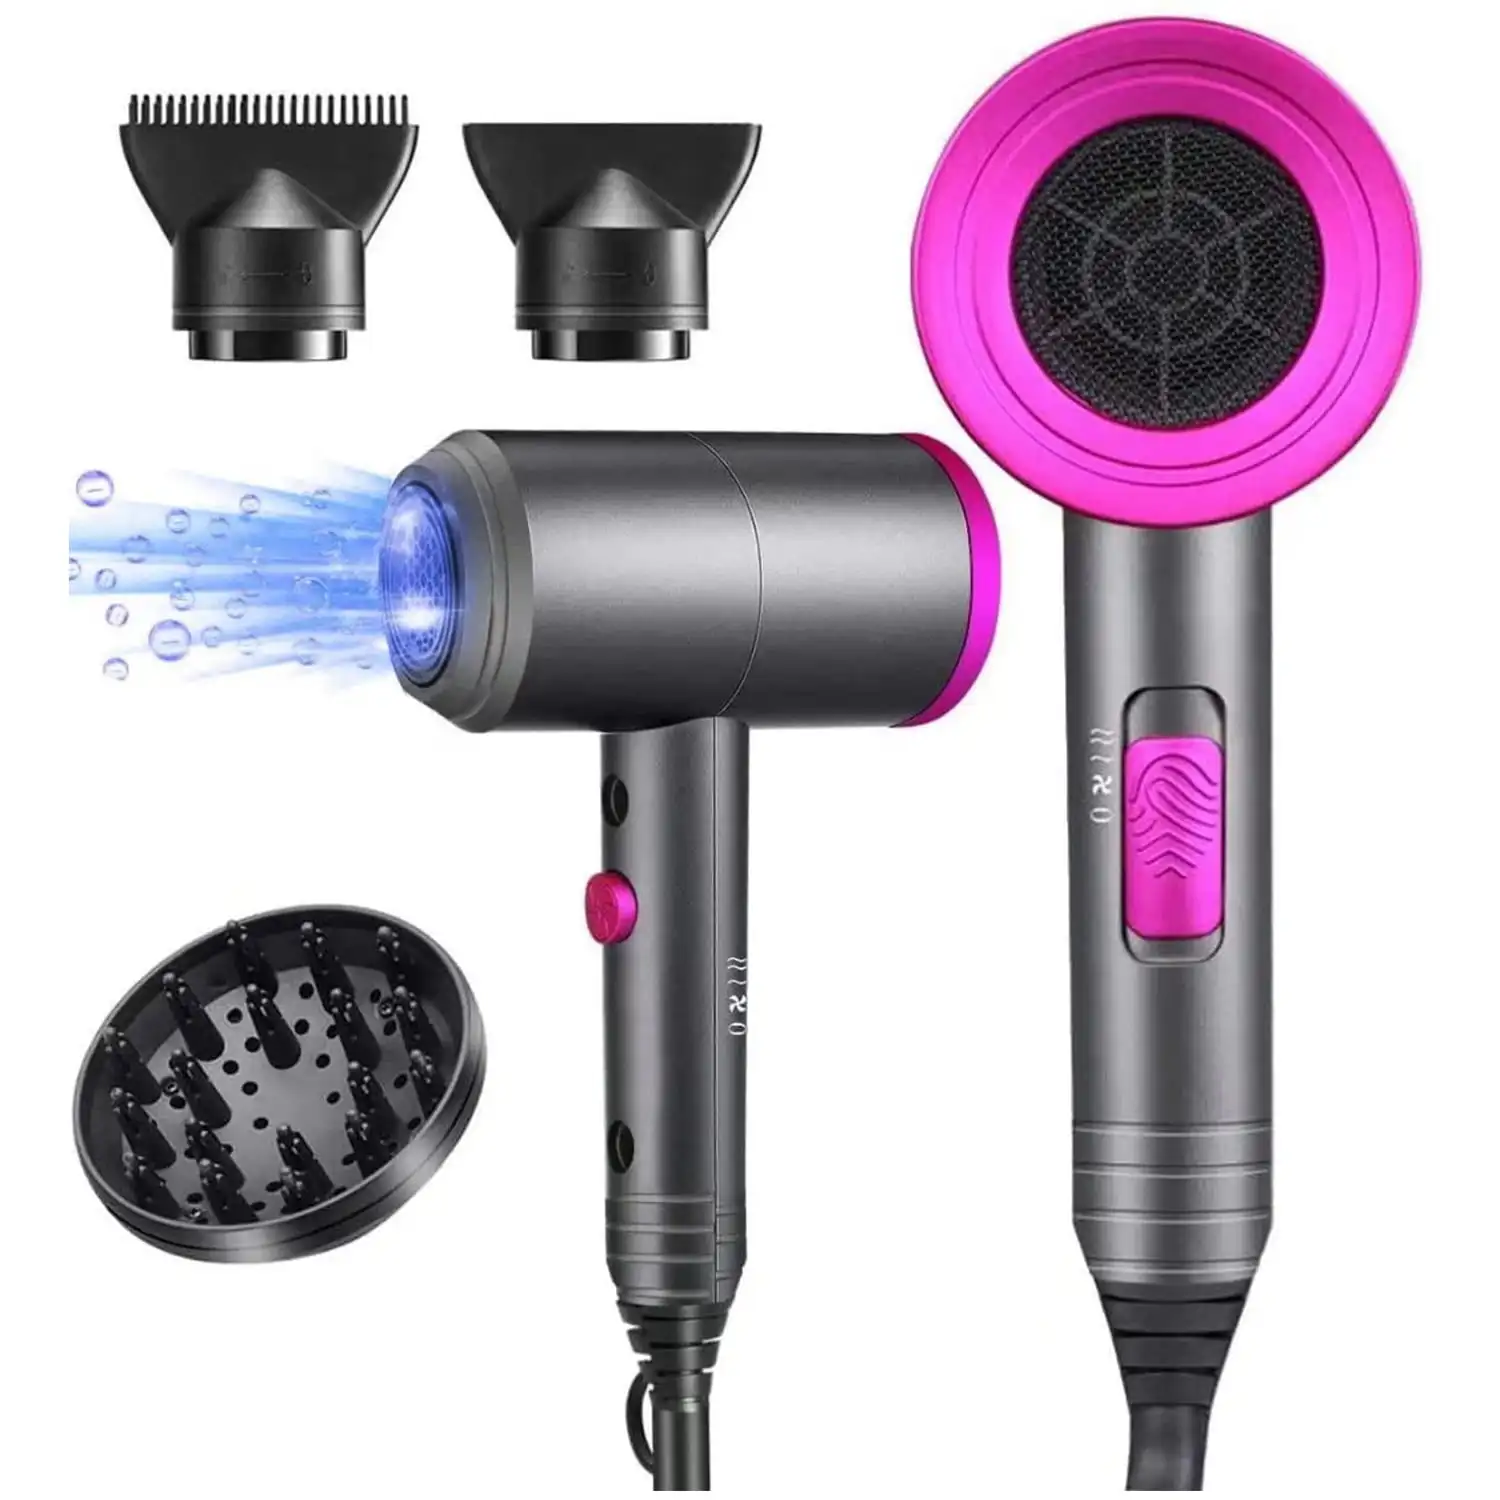 

Delivery within 7-10 daysHKEEY Lonic Hair Dryer, Professional Salon Negative Lons Hair Blow Dryer with Contain 2 Nozzles and 1 D